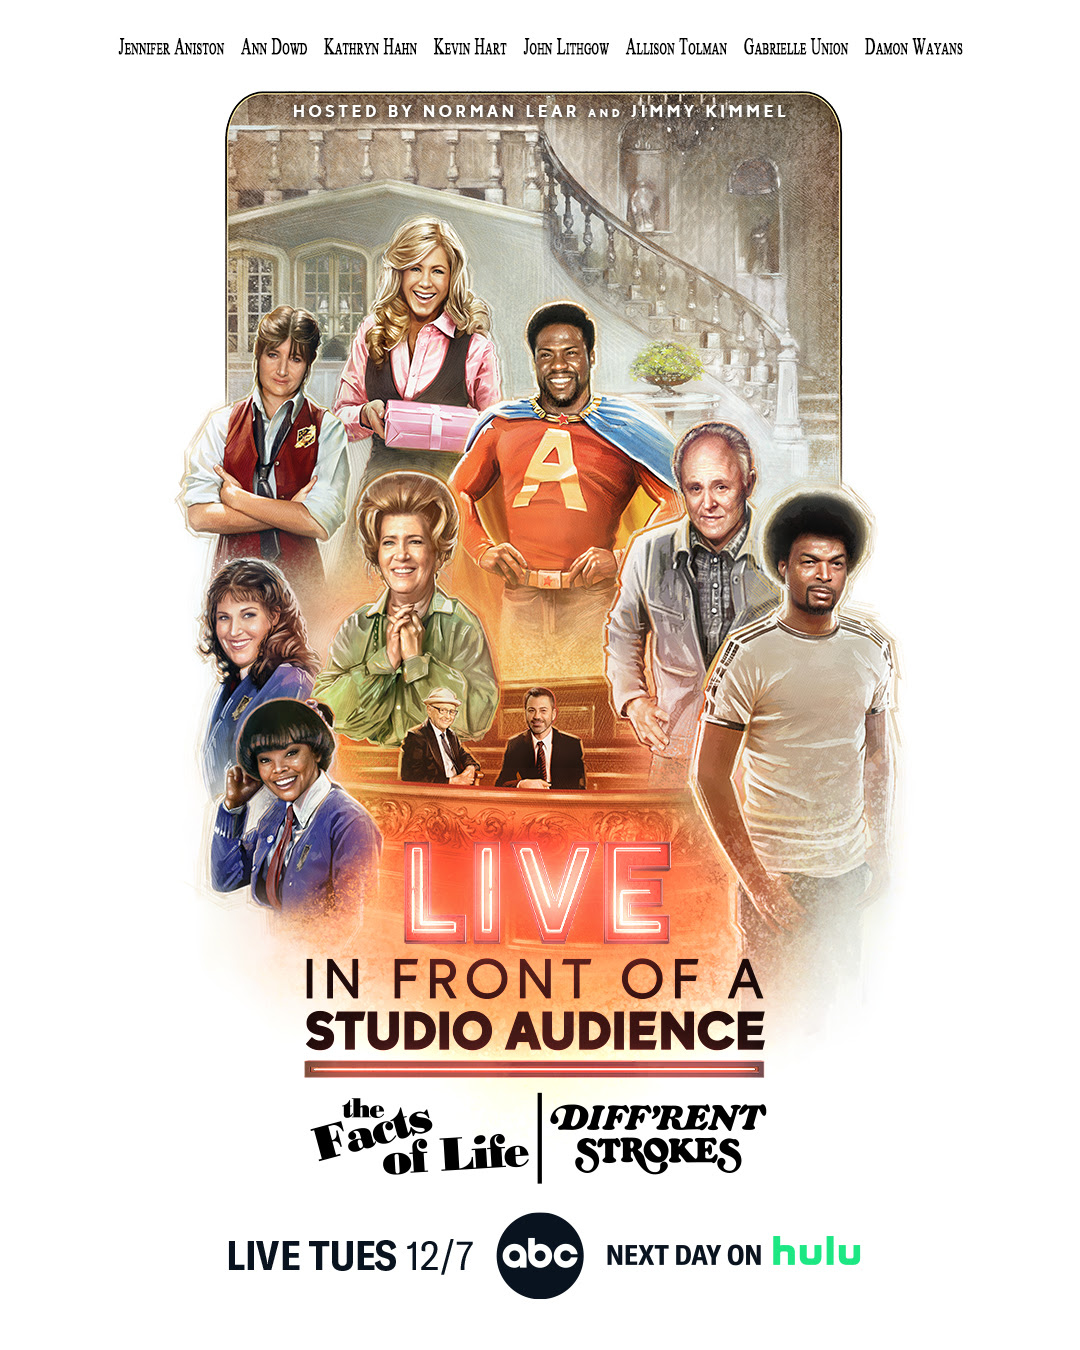 `Live in Front of a Studio Audience: 'The Facts of Life' and 'Diff'rent Strokes' ` (Graphic ©2021 American Broadcasting Companies Inc.)